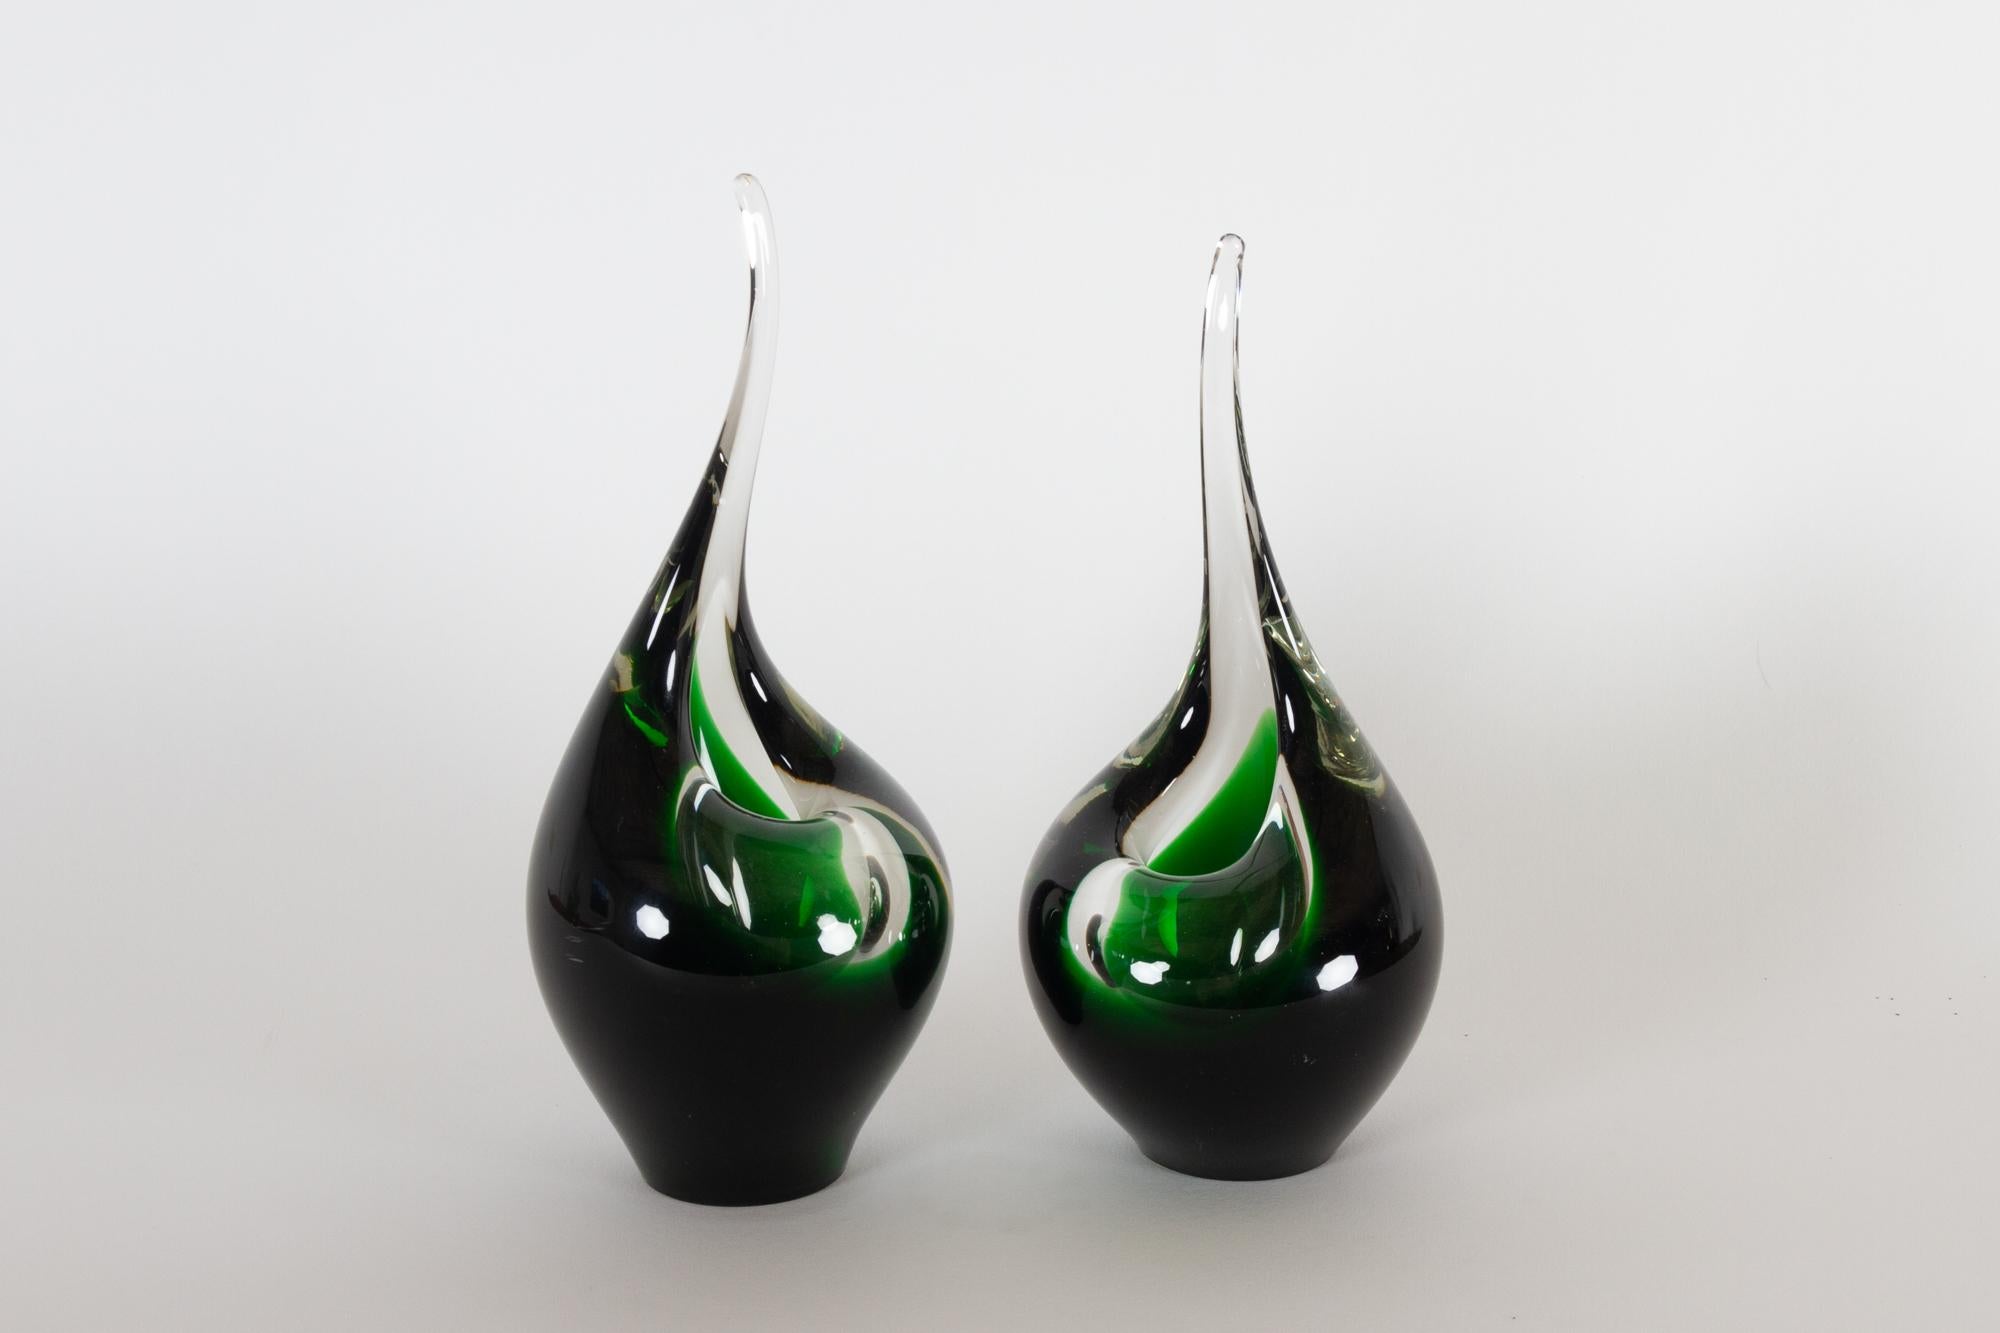 Holmegaard Flamingo vases by Per Lüthen, 1961.
Flamingo is a series of tear shaped orchid vases with an upright point in green and transparent glass. Mouth blown and drawn. Not that many are left, as the tip is very fragile.
Designed in 1953, made